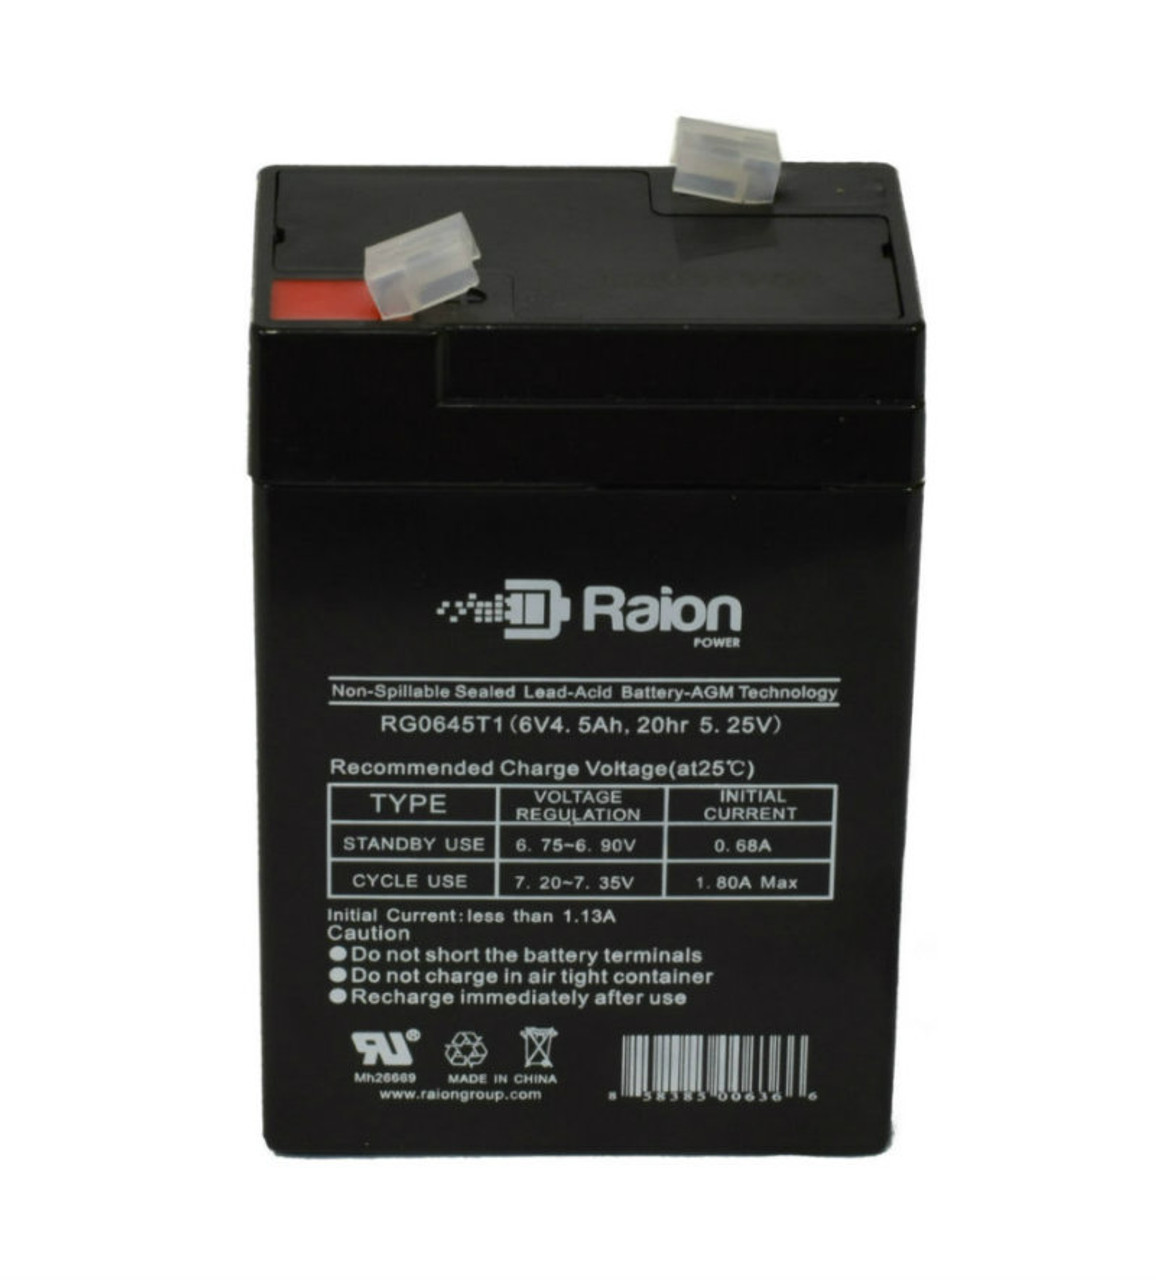 Raion Power RG0645T1 Replacement Battery Cartridge for Tork 420